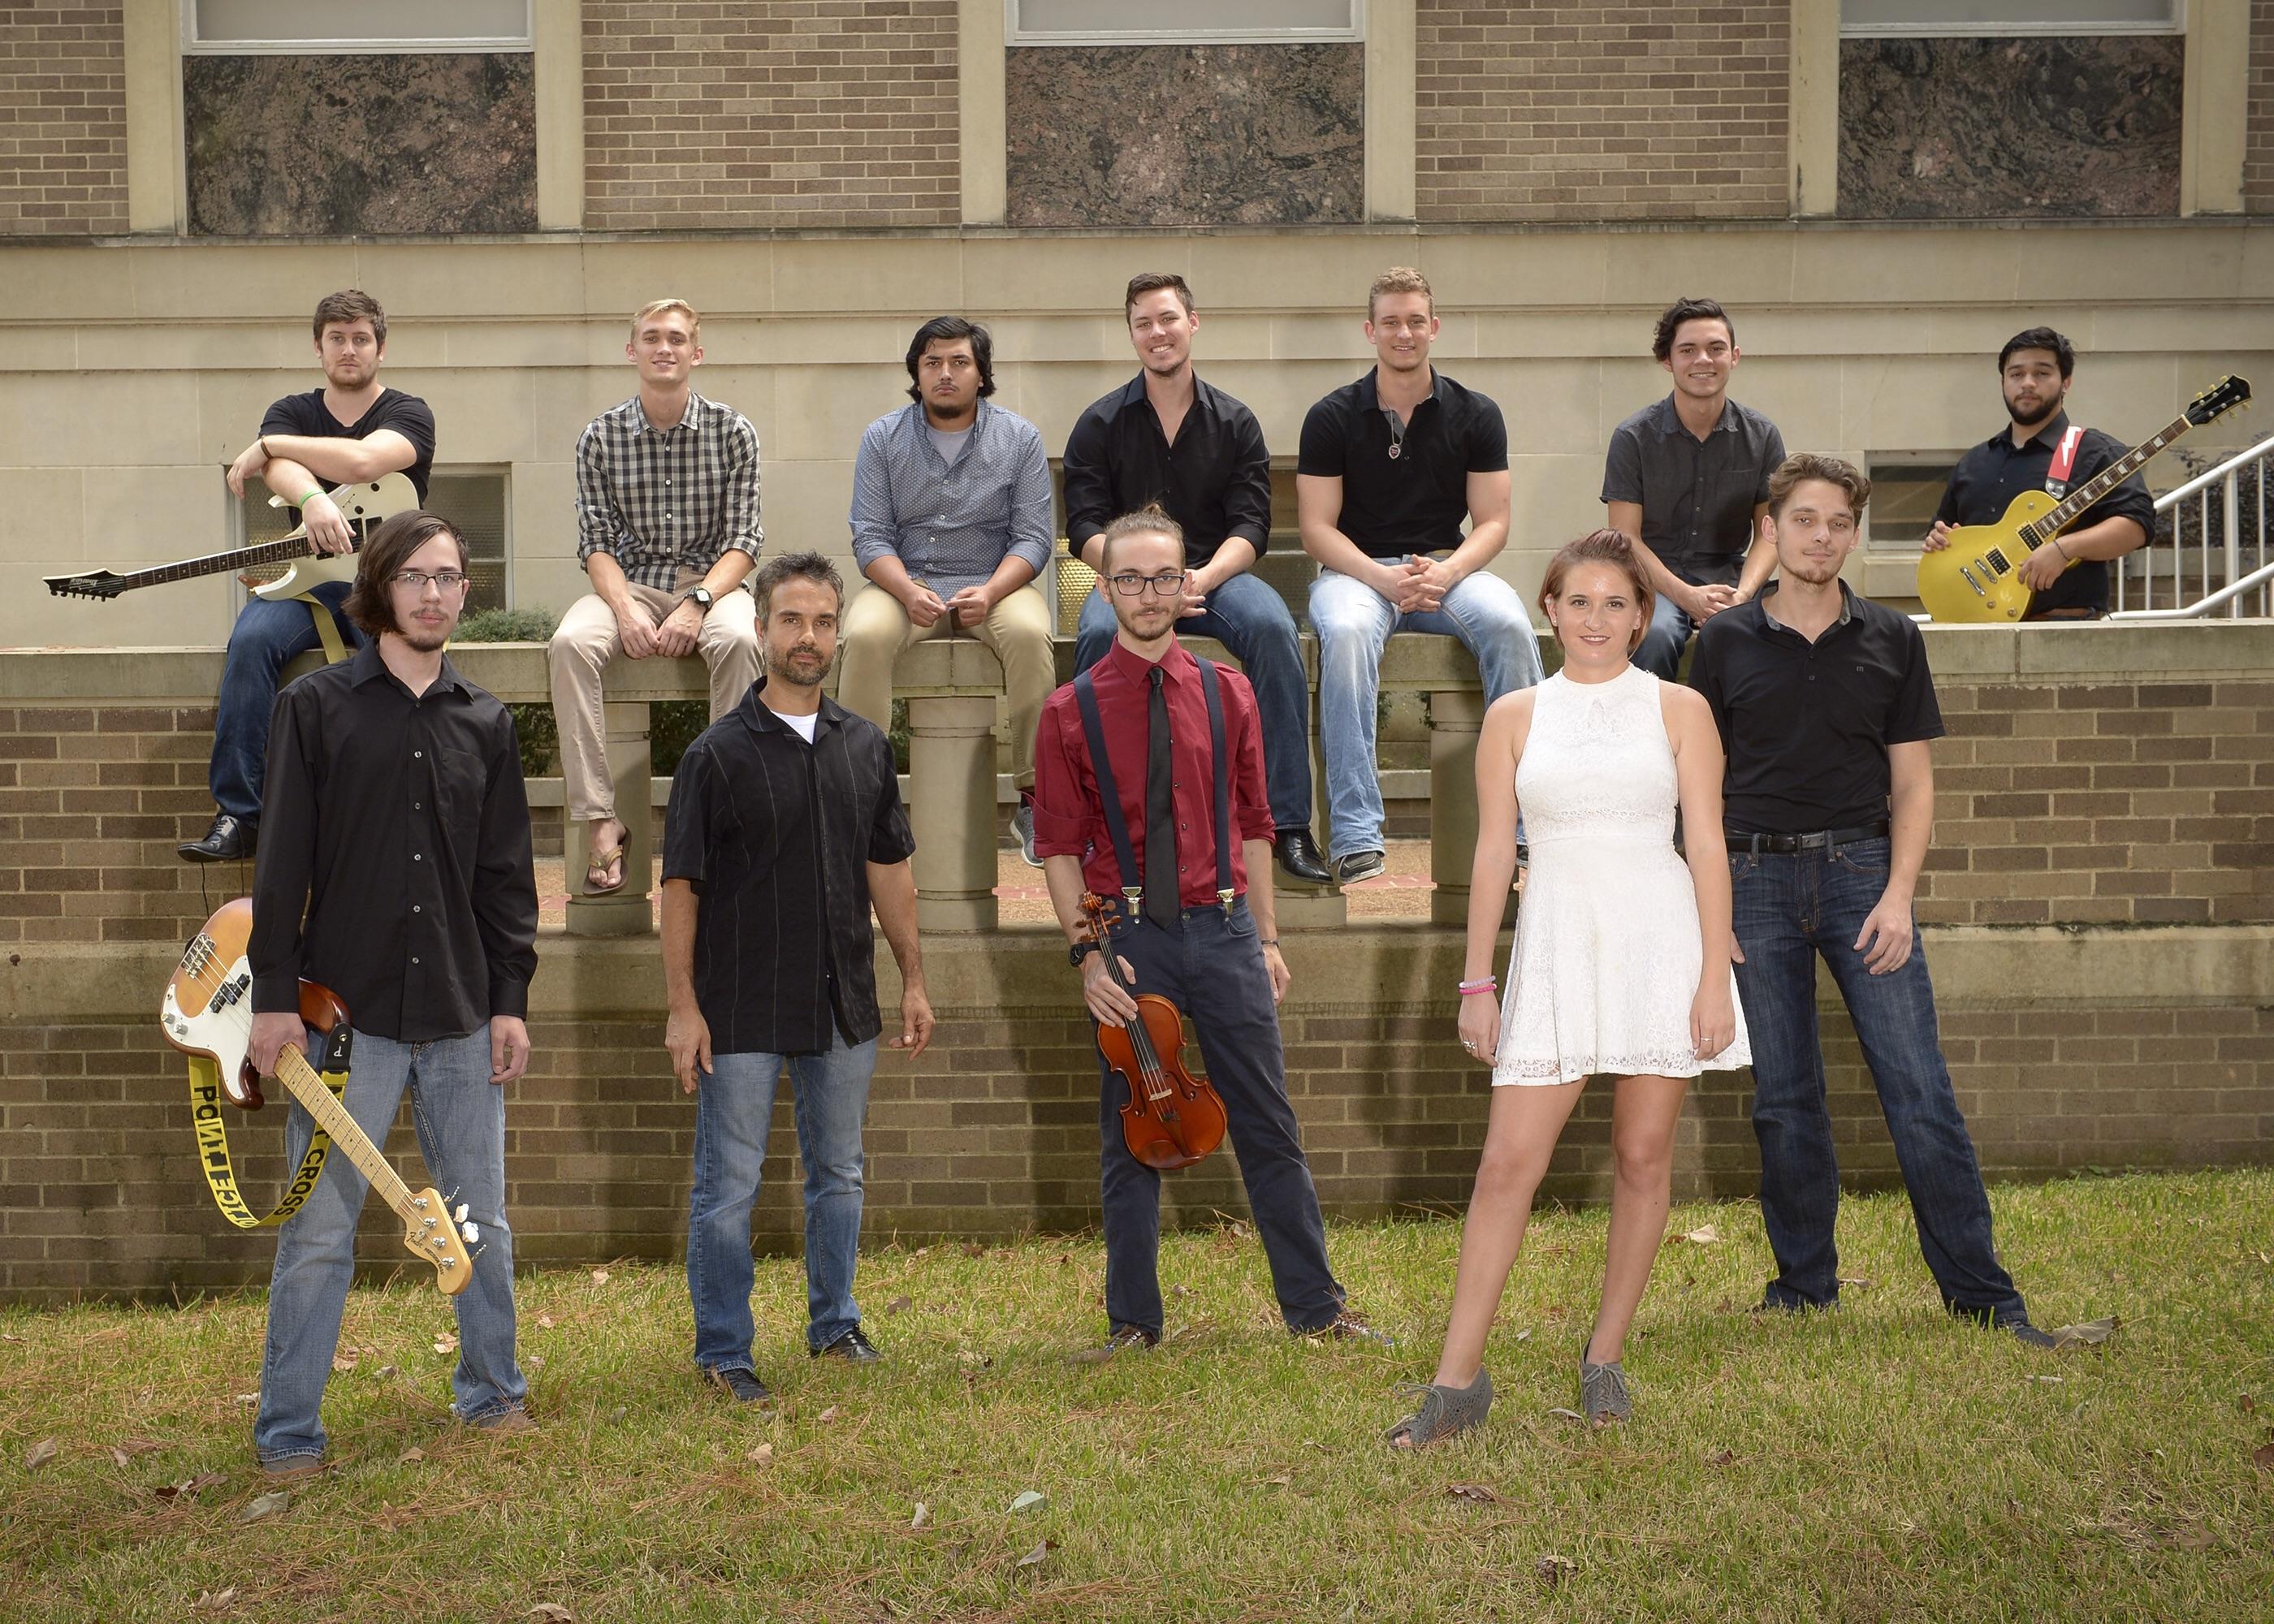 Two Rockin’ Axes ensembles will perform music from the 1980s in a concert at 7:30 p.m. Thursday, Dec. 8, in Cole Concert Hall on the SFA campus.